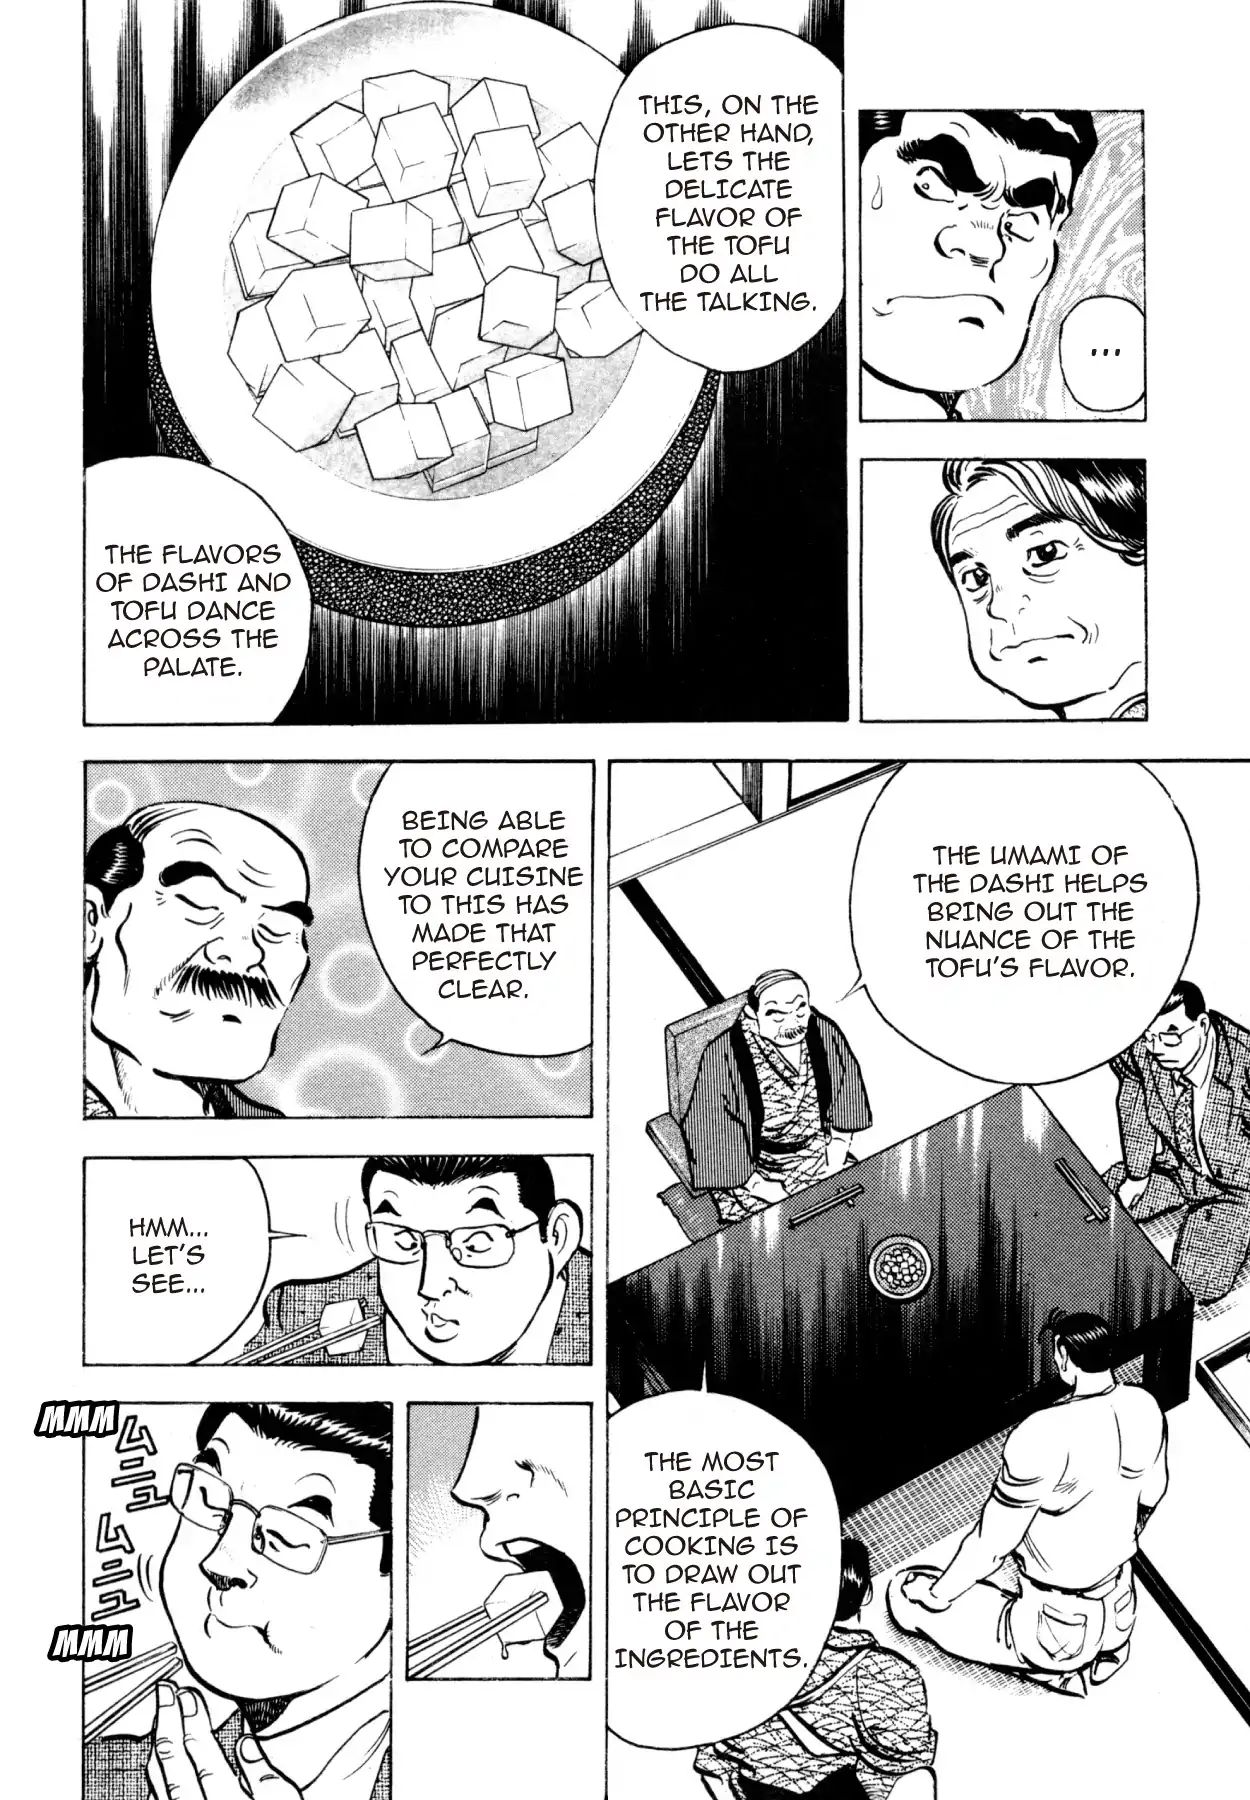 Shoku King VOL.3 CHAPTER 24: THE MEANING OF THE STONEWALL